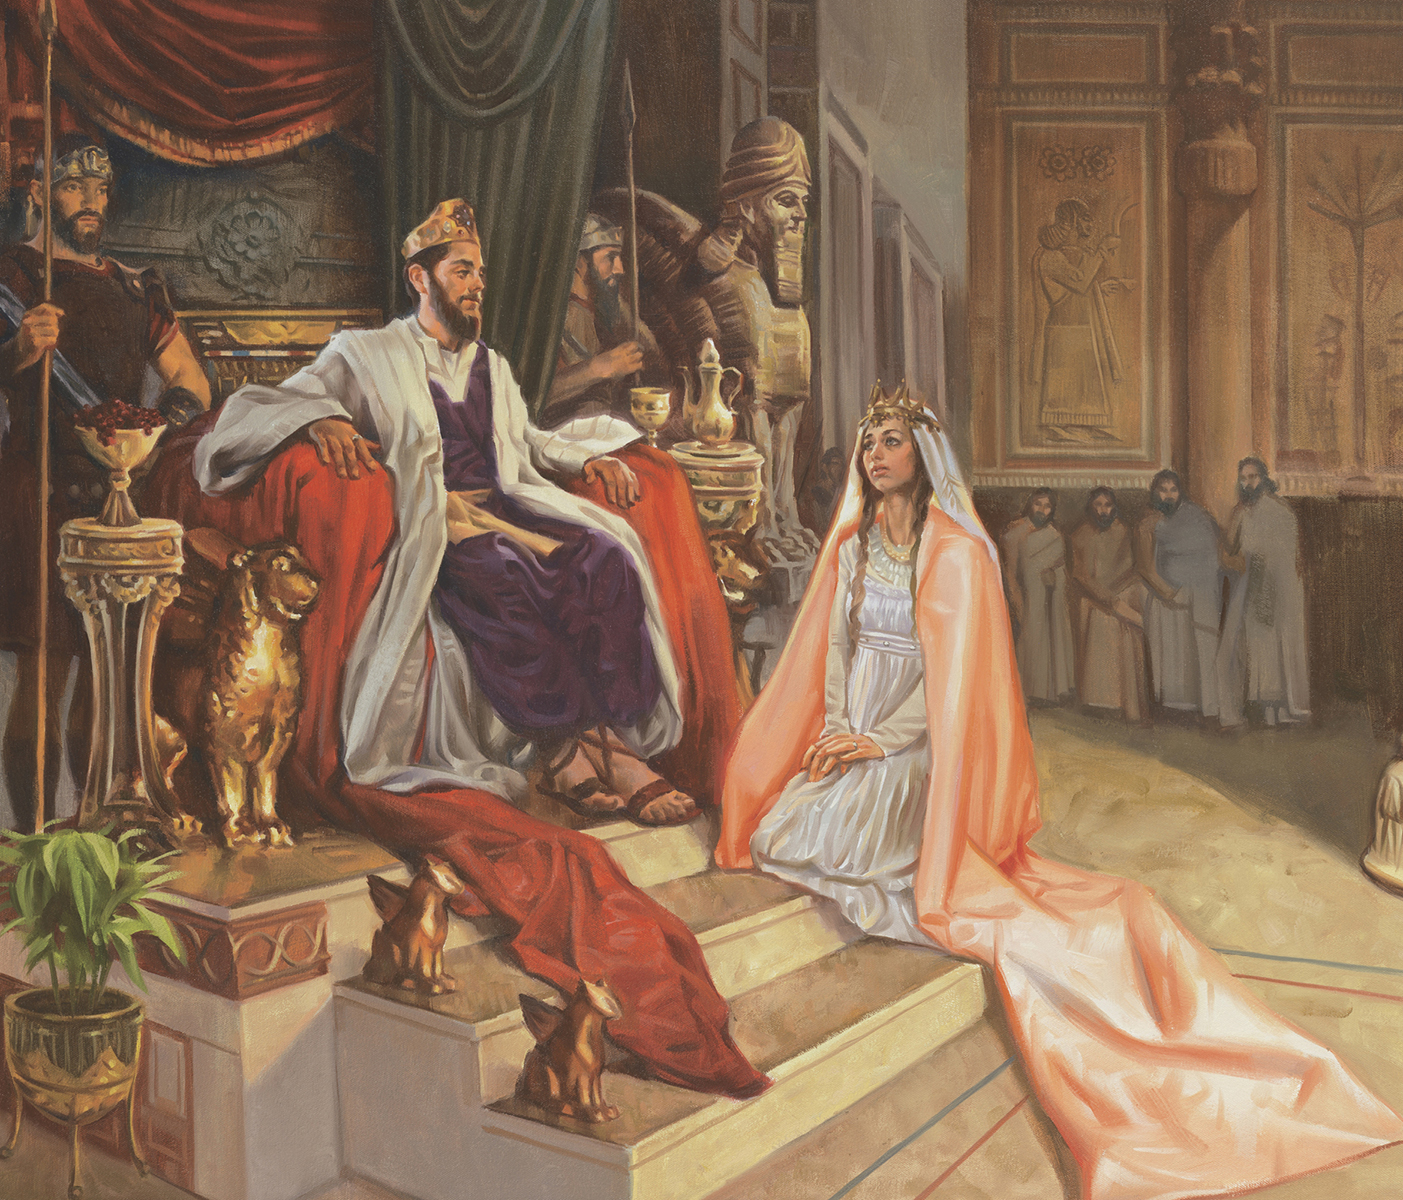 Queen Esther Saves Jehovah's People